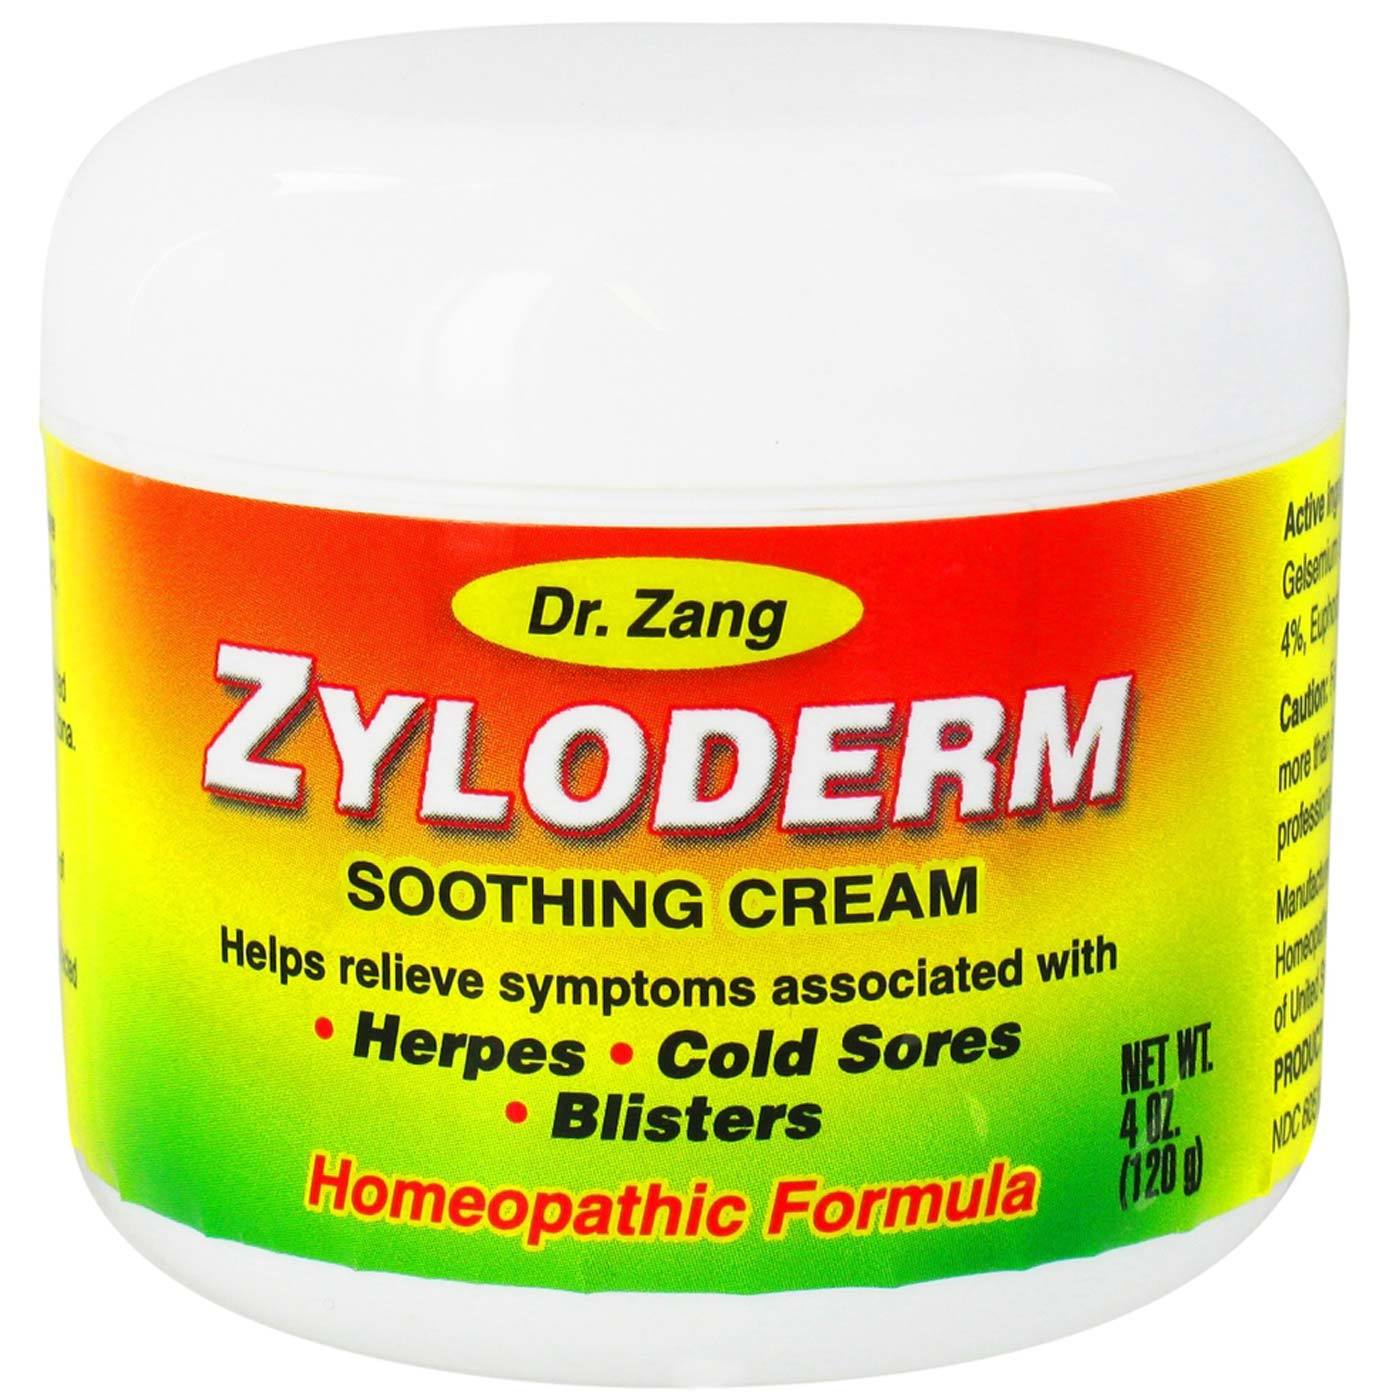 Dr. Zang Homeopathic Zyloderm Soothing Cream